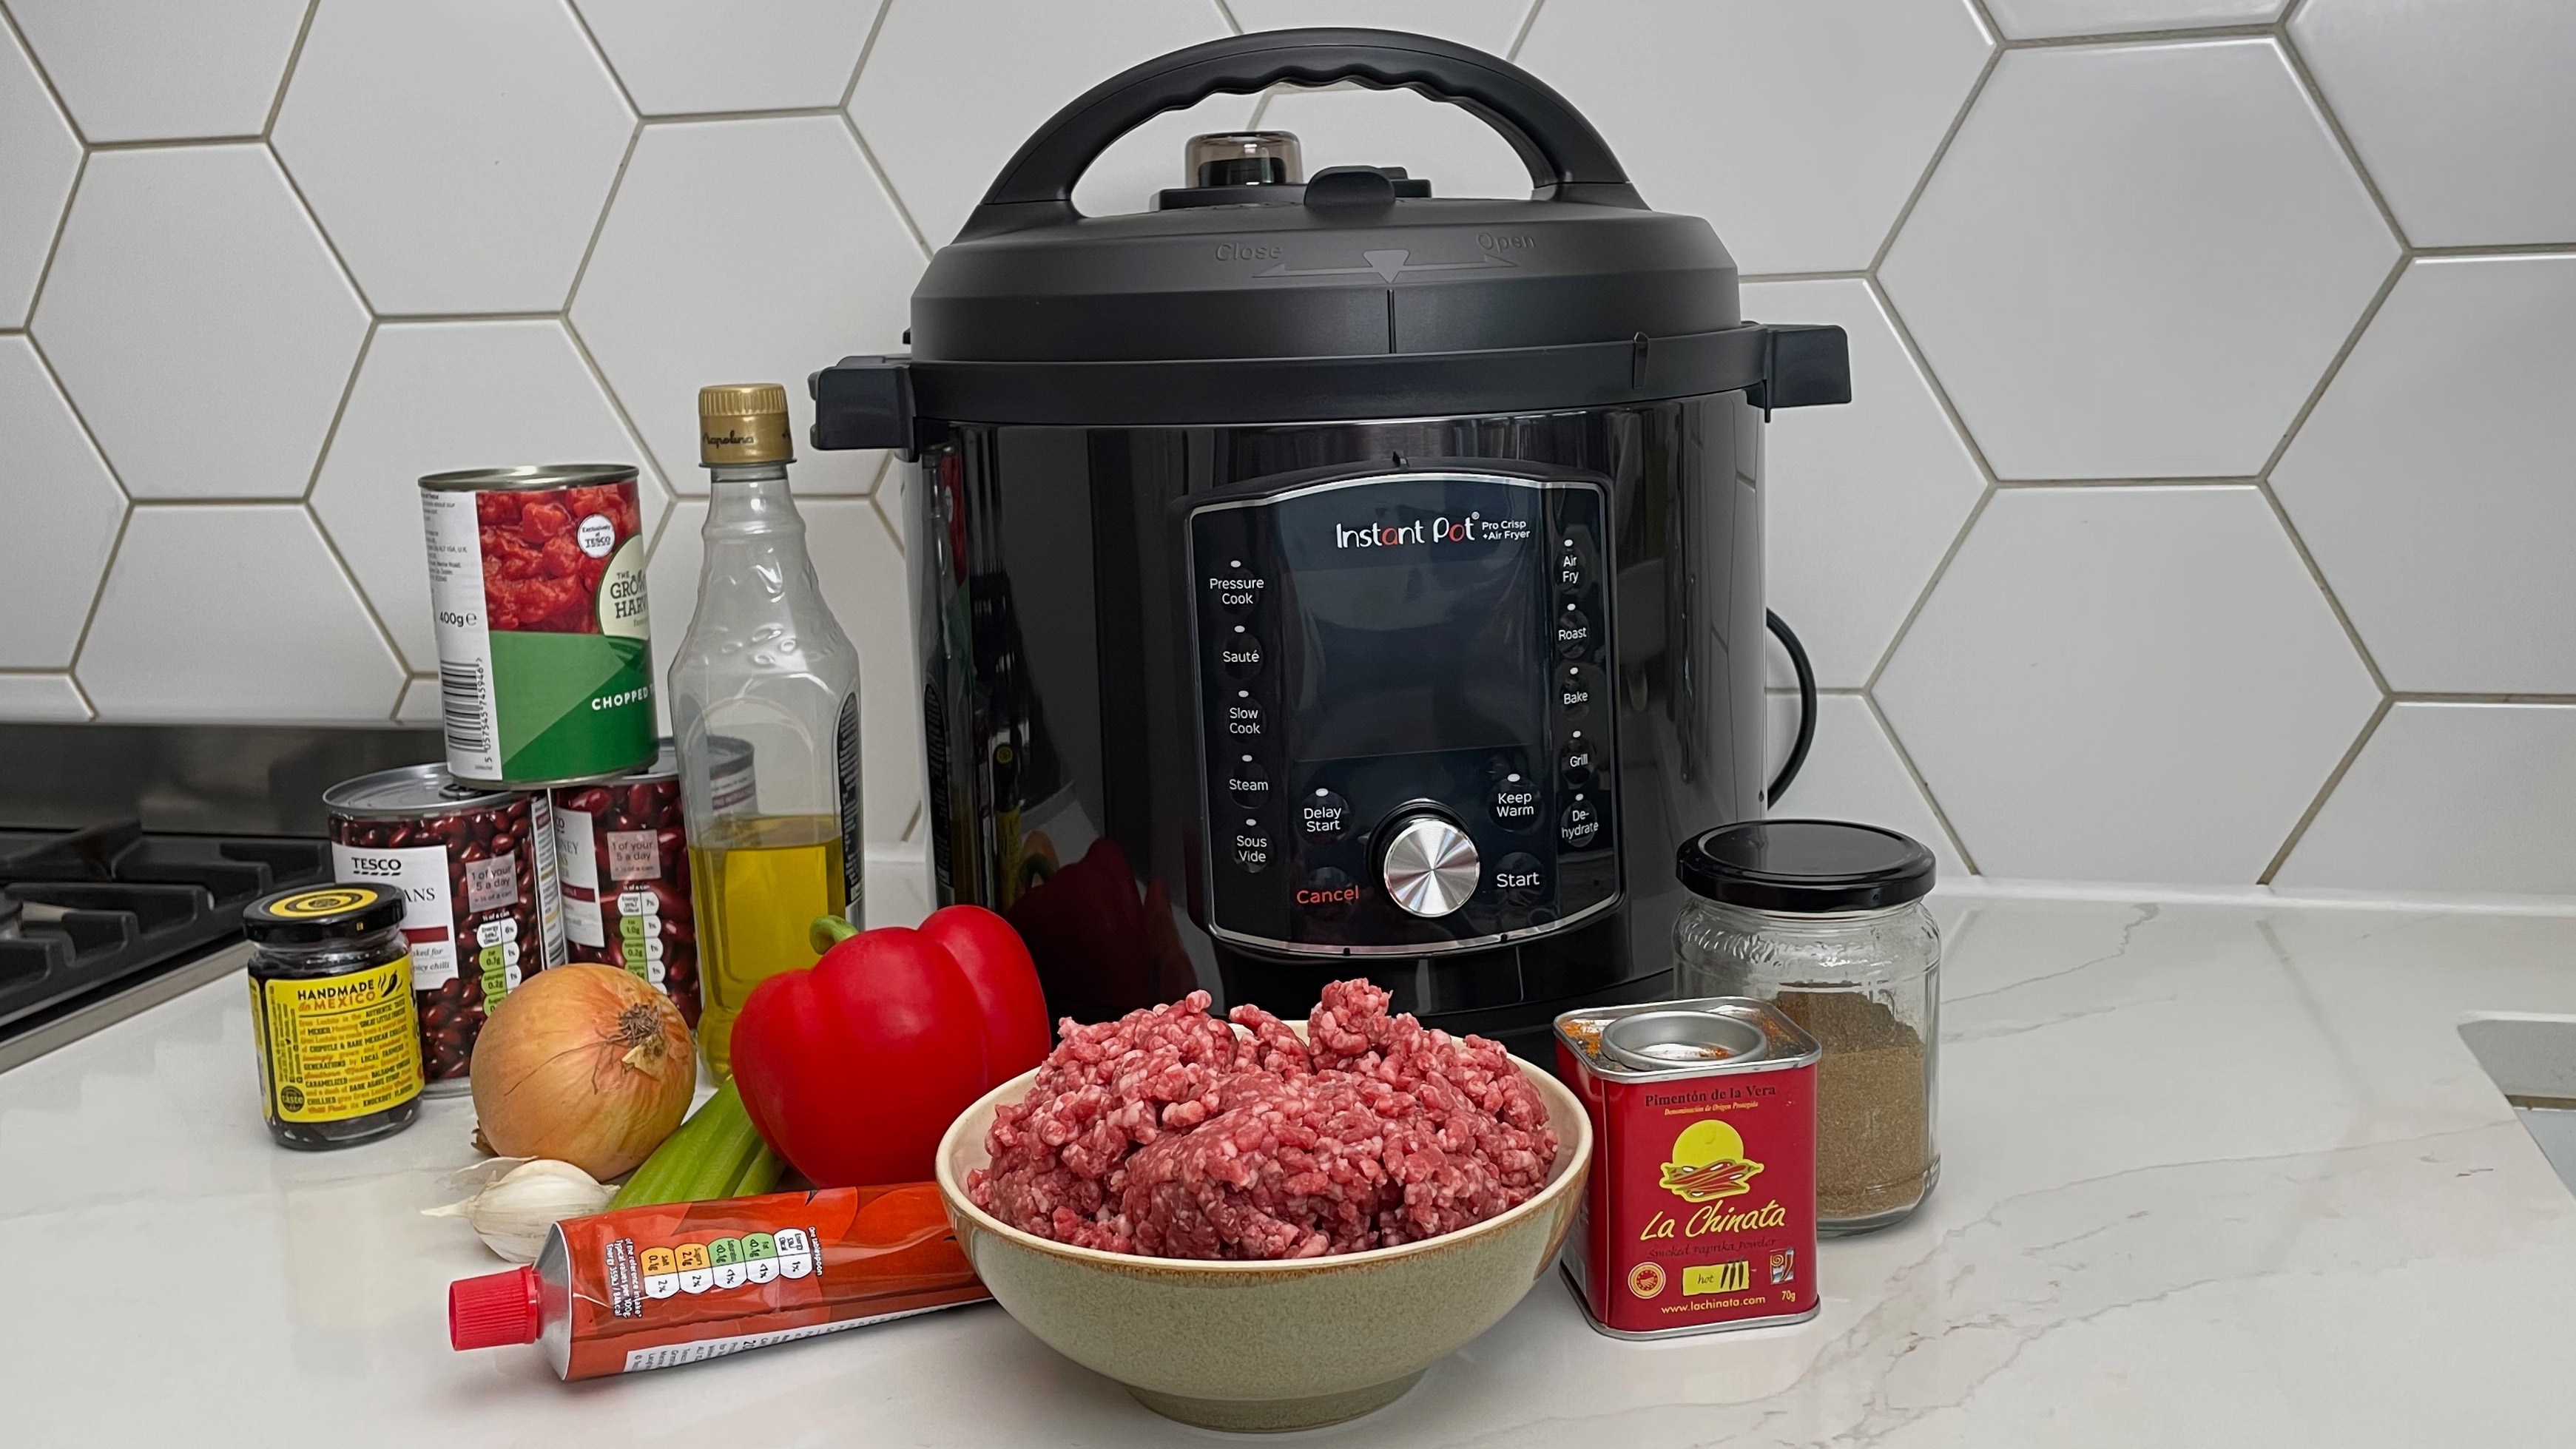 The 5 best pressure cookers of 2022